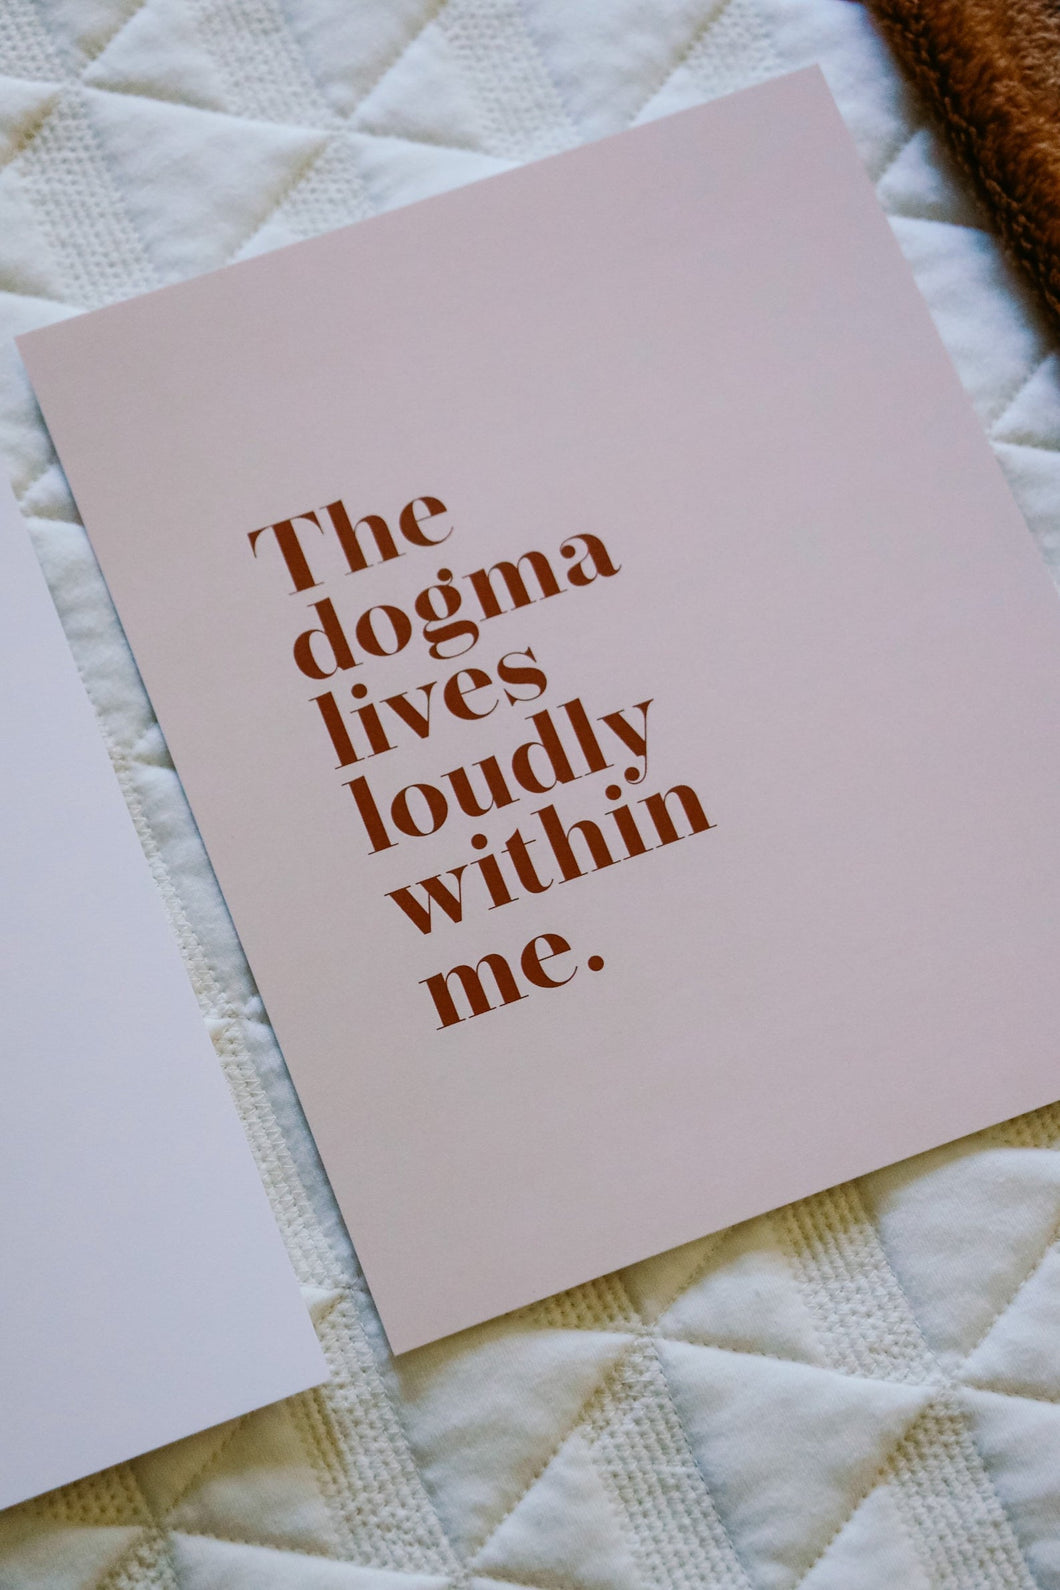 The dogma lives loudly within me - Rust & Blush